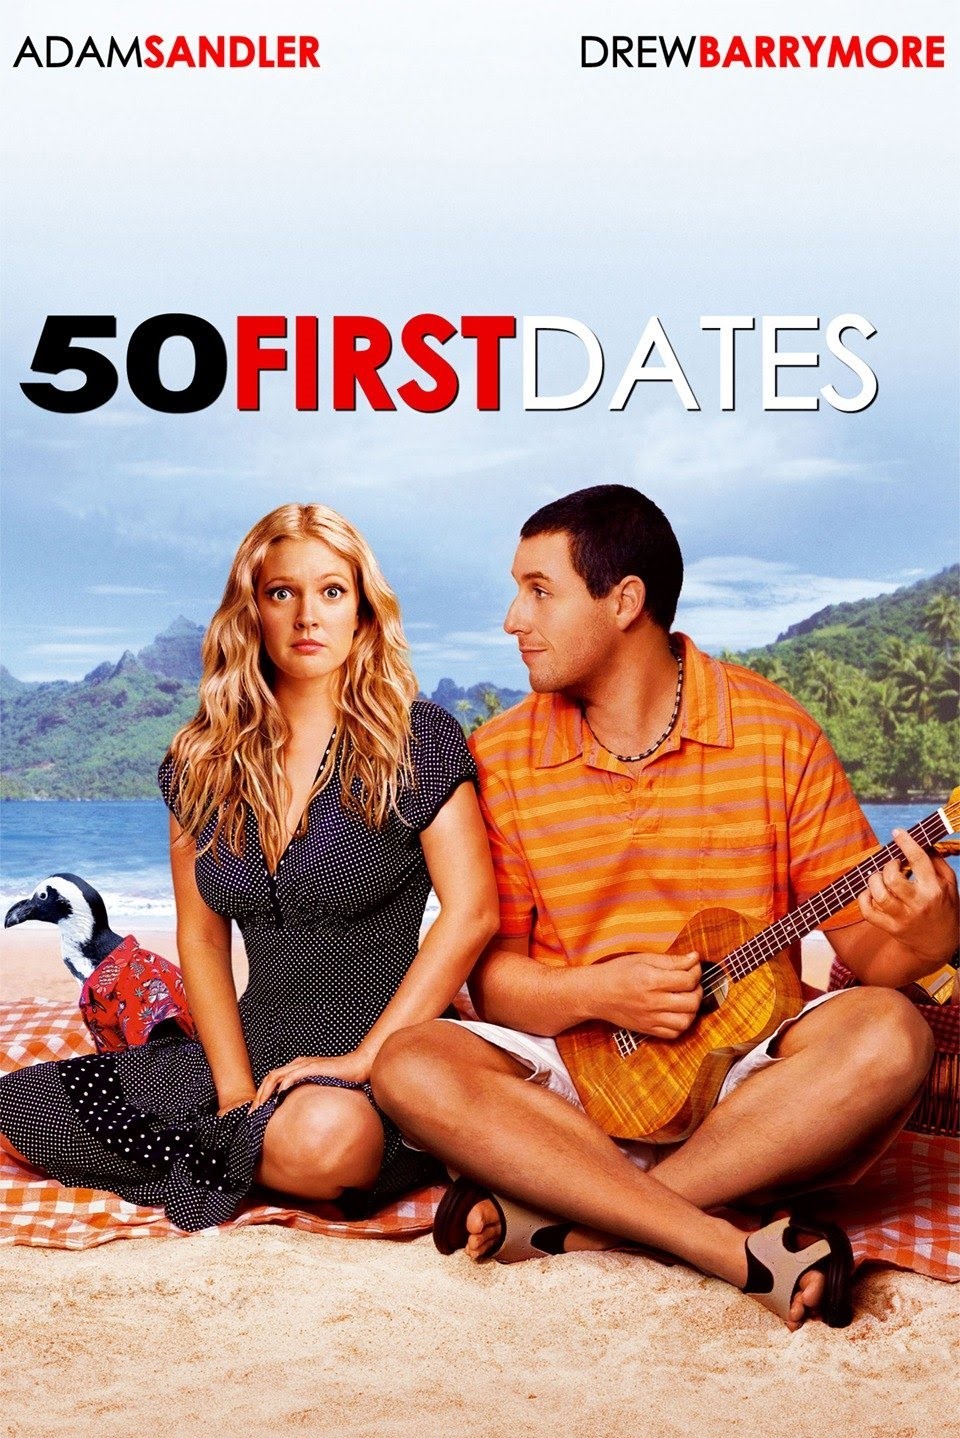 50 first dates movie locations